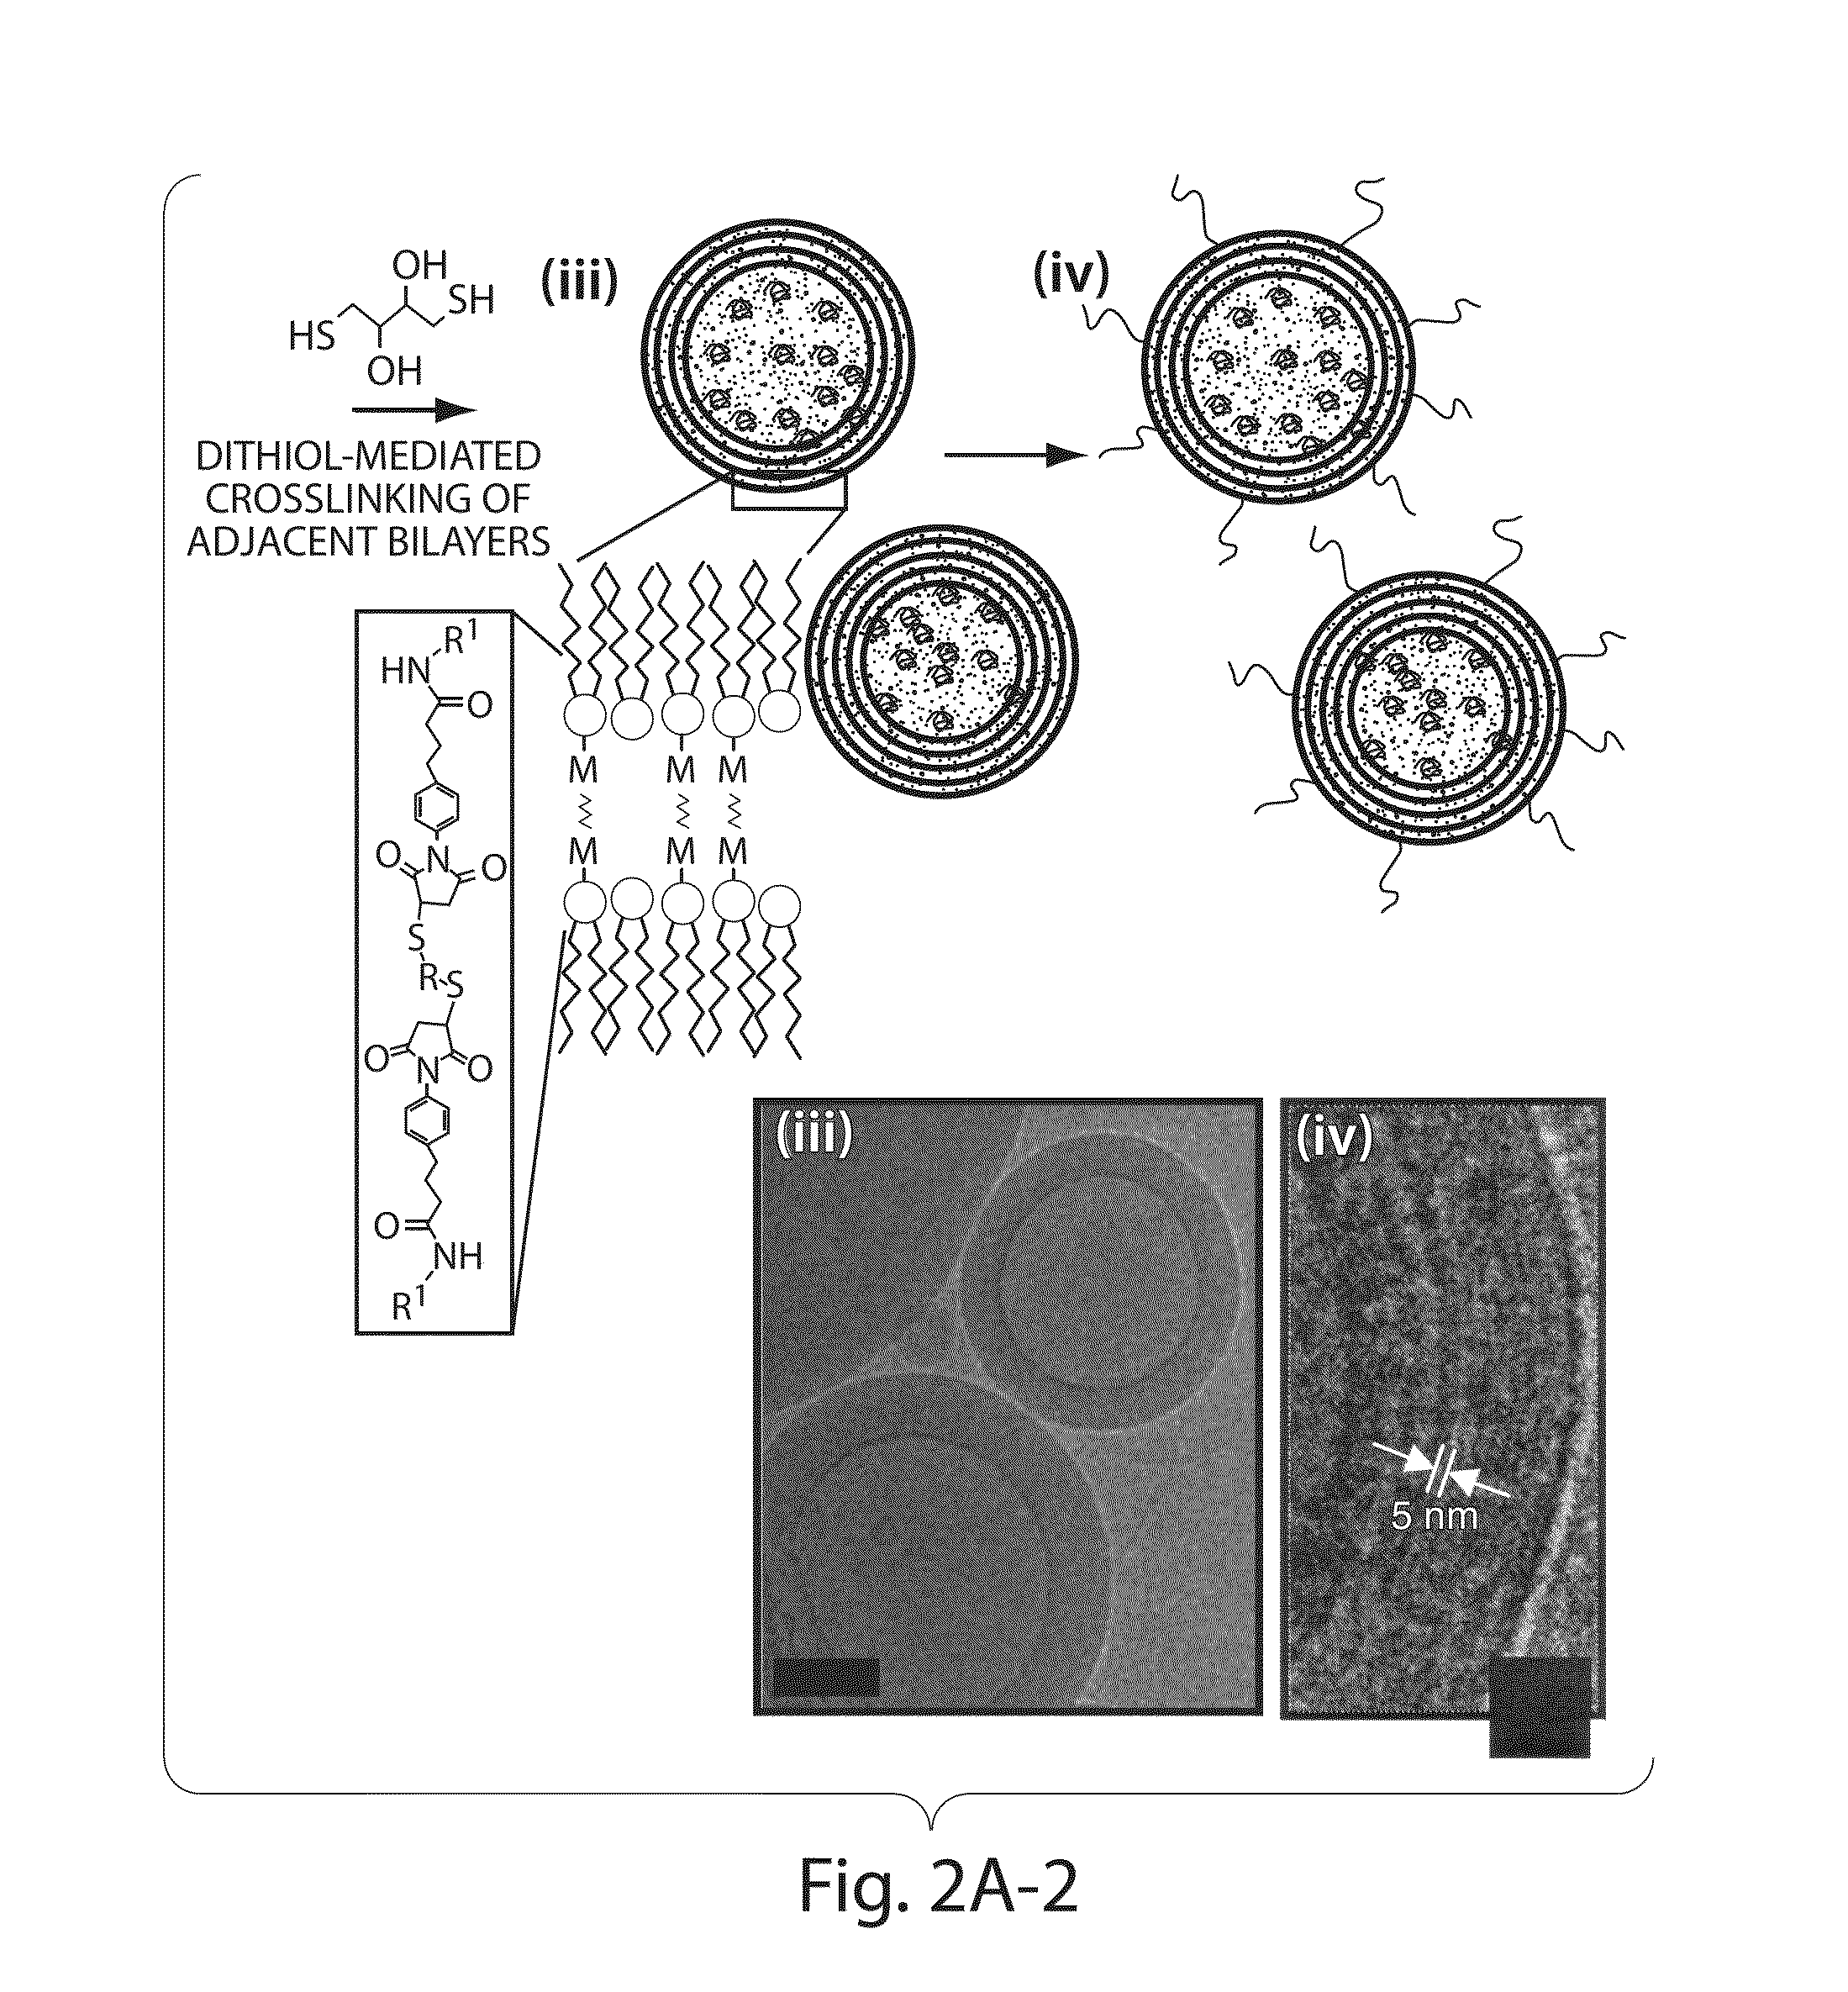 Lipid vesicle compositions and methods of use